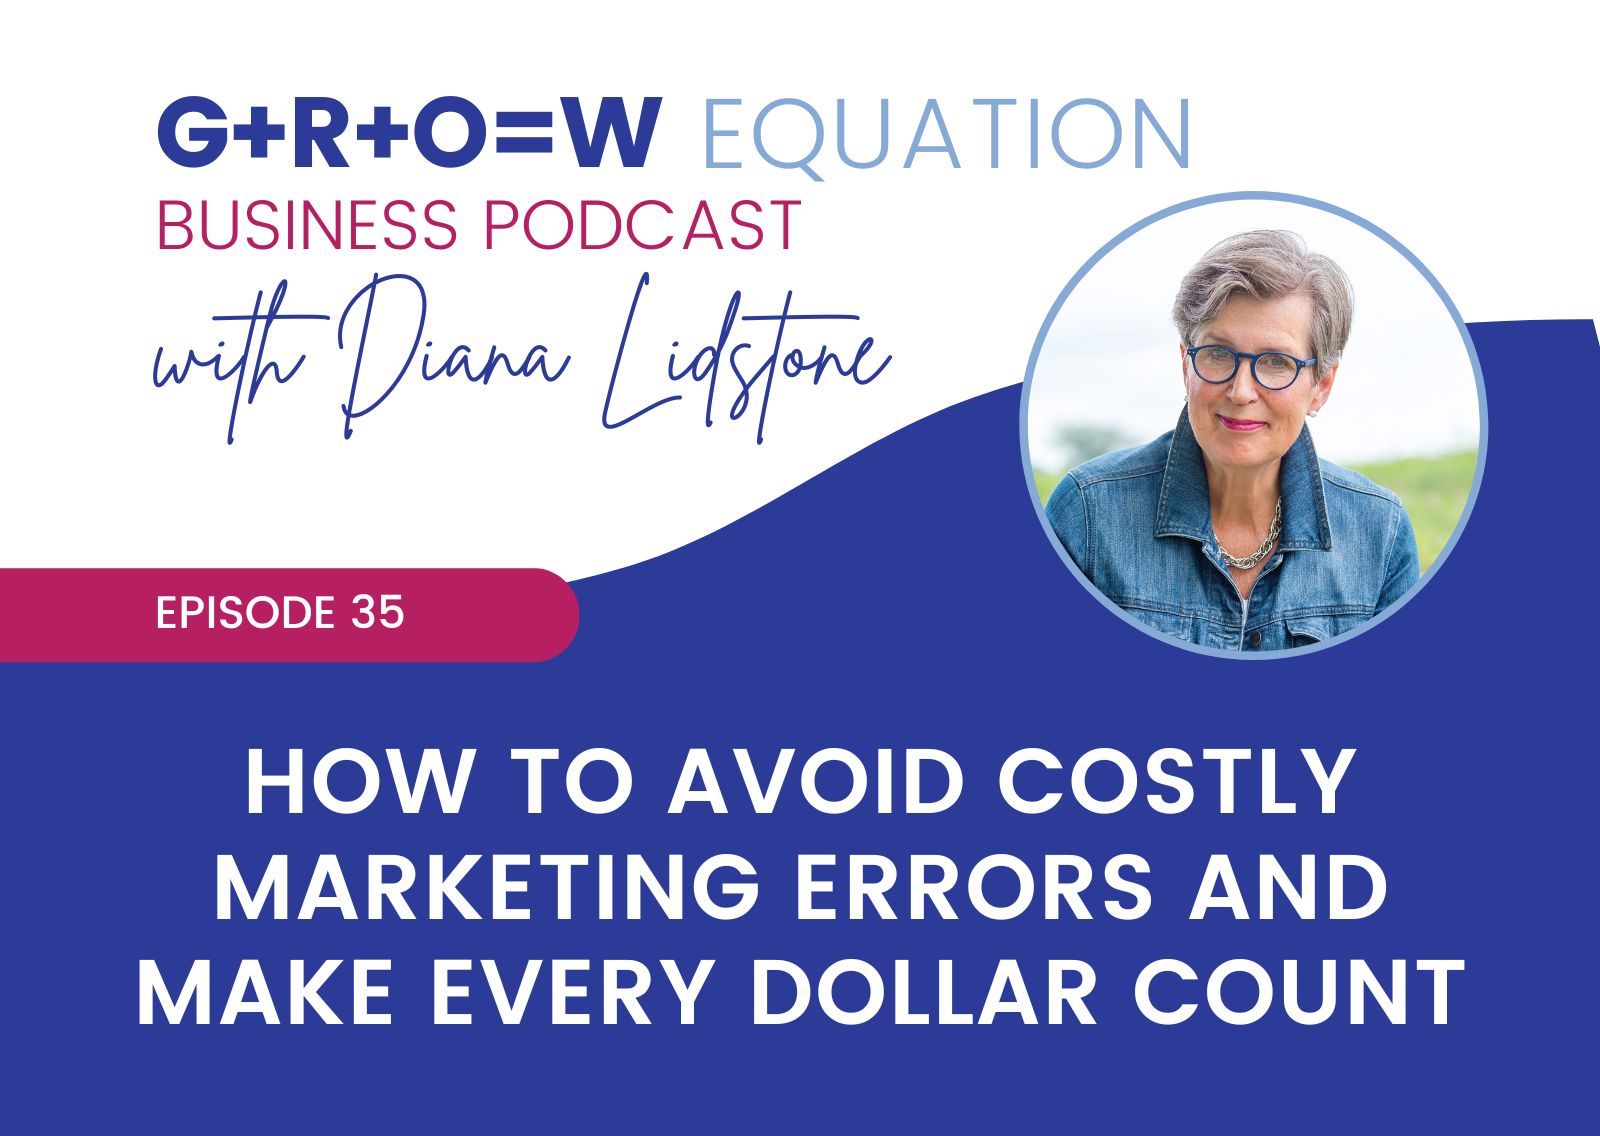 How to avoid costly marketing errors